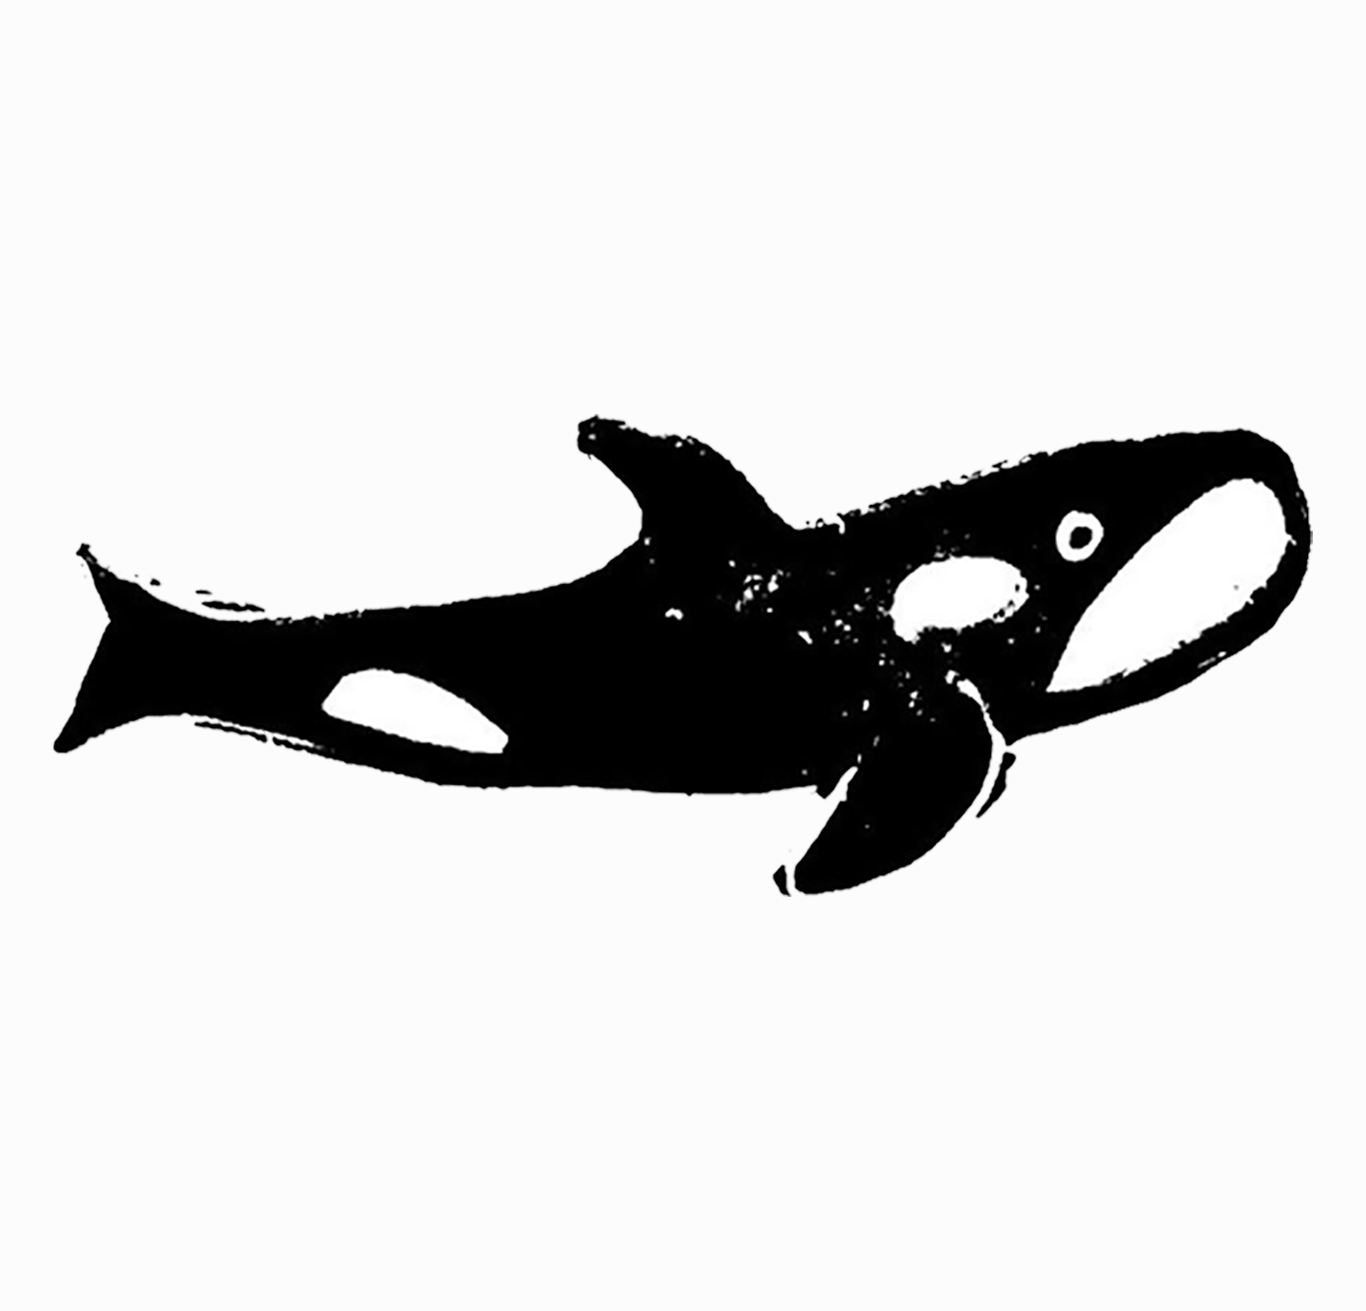 Somewhat grainy black-and-white linocut print of a simply stylized orca whale, centered on a slightly off-white background.